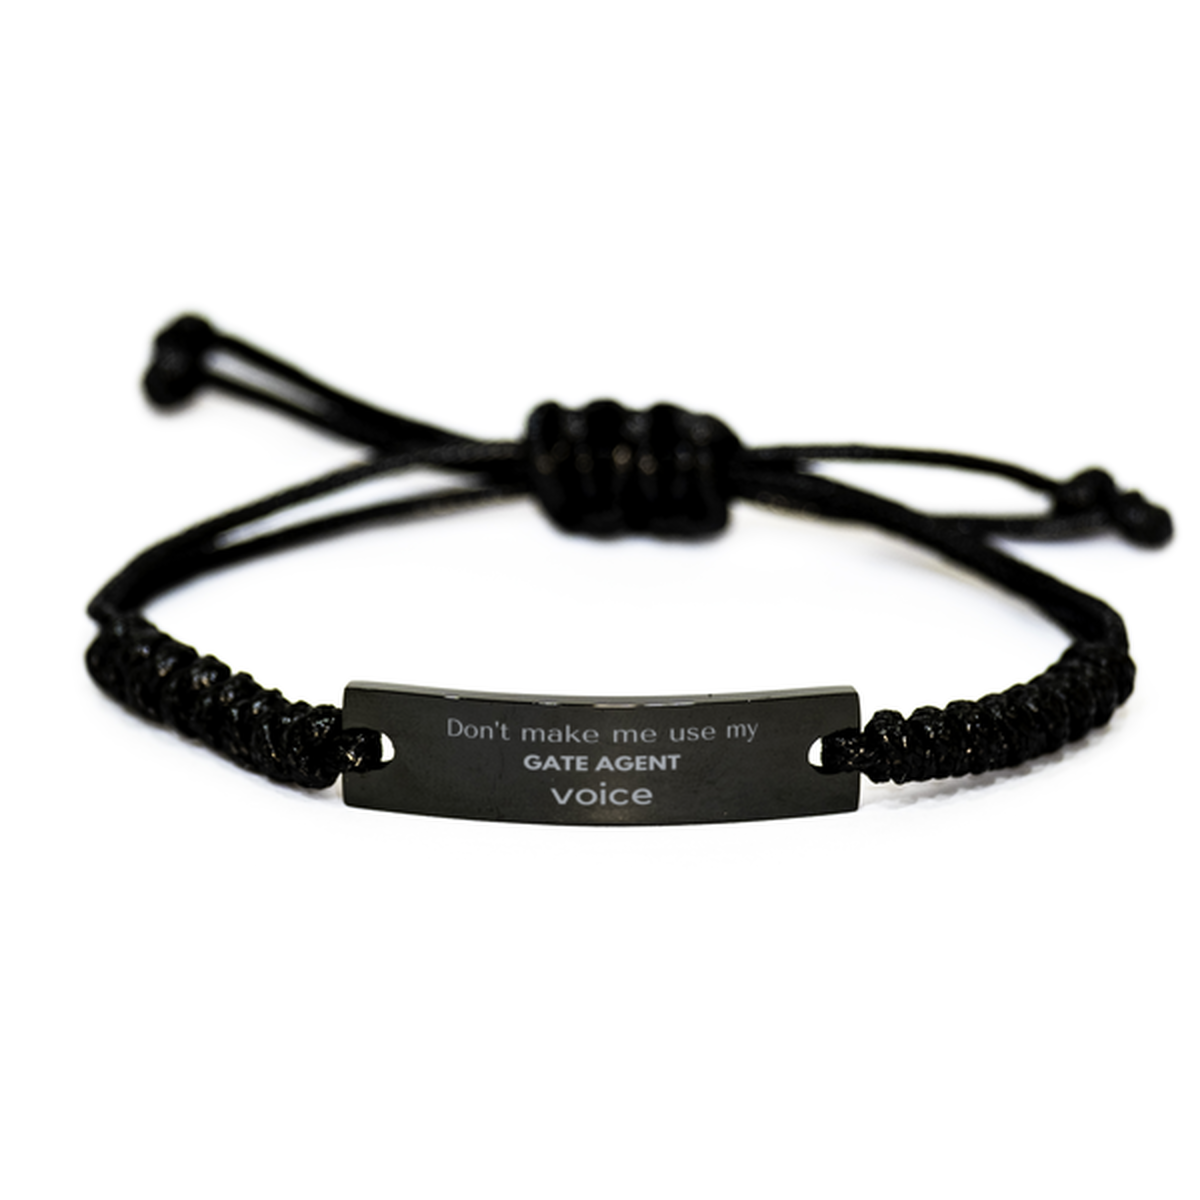 Don't make me use my Gate Agent voice, Sarcasm Gate Agent Gifts, Christmas Gate Agent Black Rope Bracelet Birthday Unique Gifts For Gate Agent Coworkers, Men, Women, Colleague, Friends